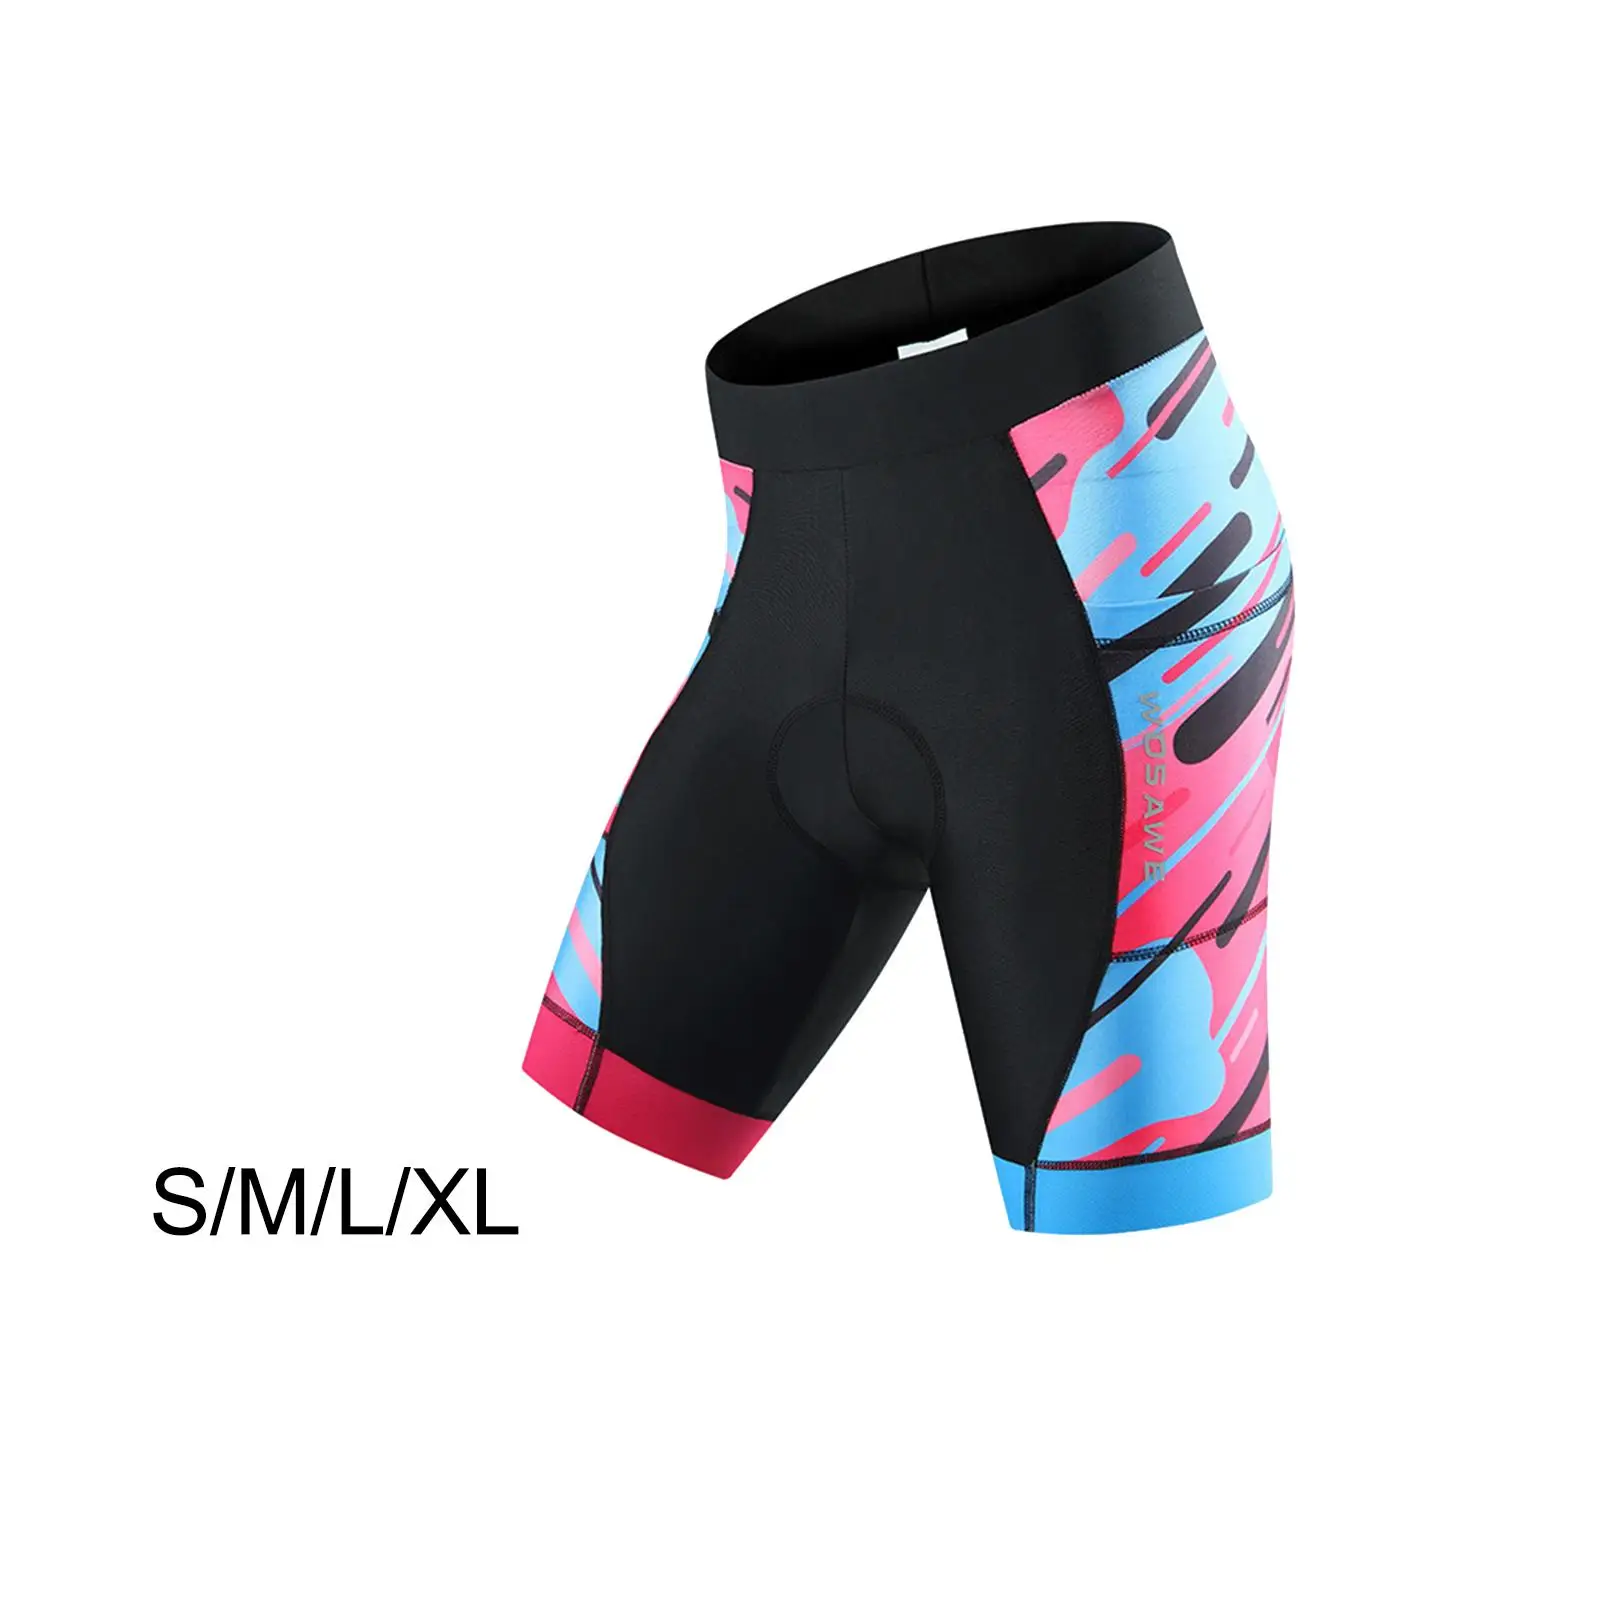 Outdoor Sports Underpants with Side Pockets Necessities Fashion Cycling Bike Shorts for Riding Sports Volleyball Dance Hiking